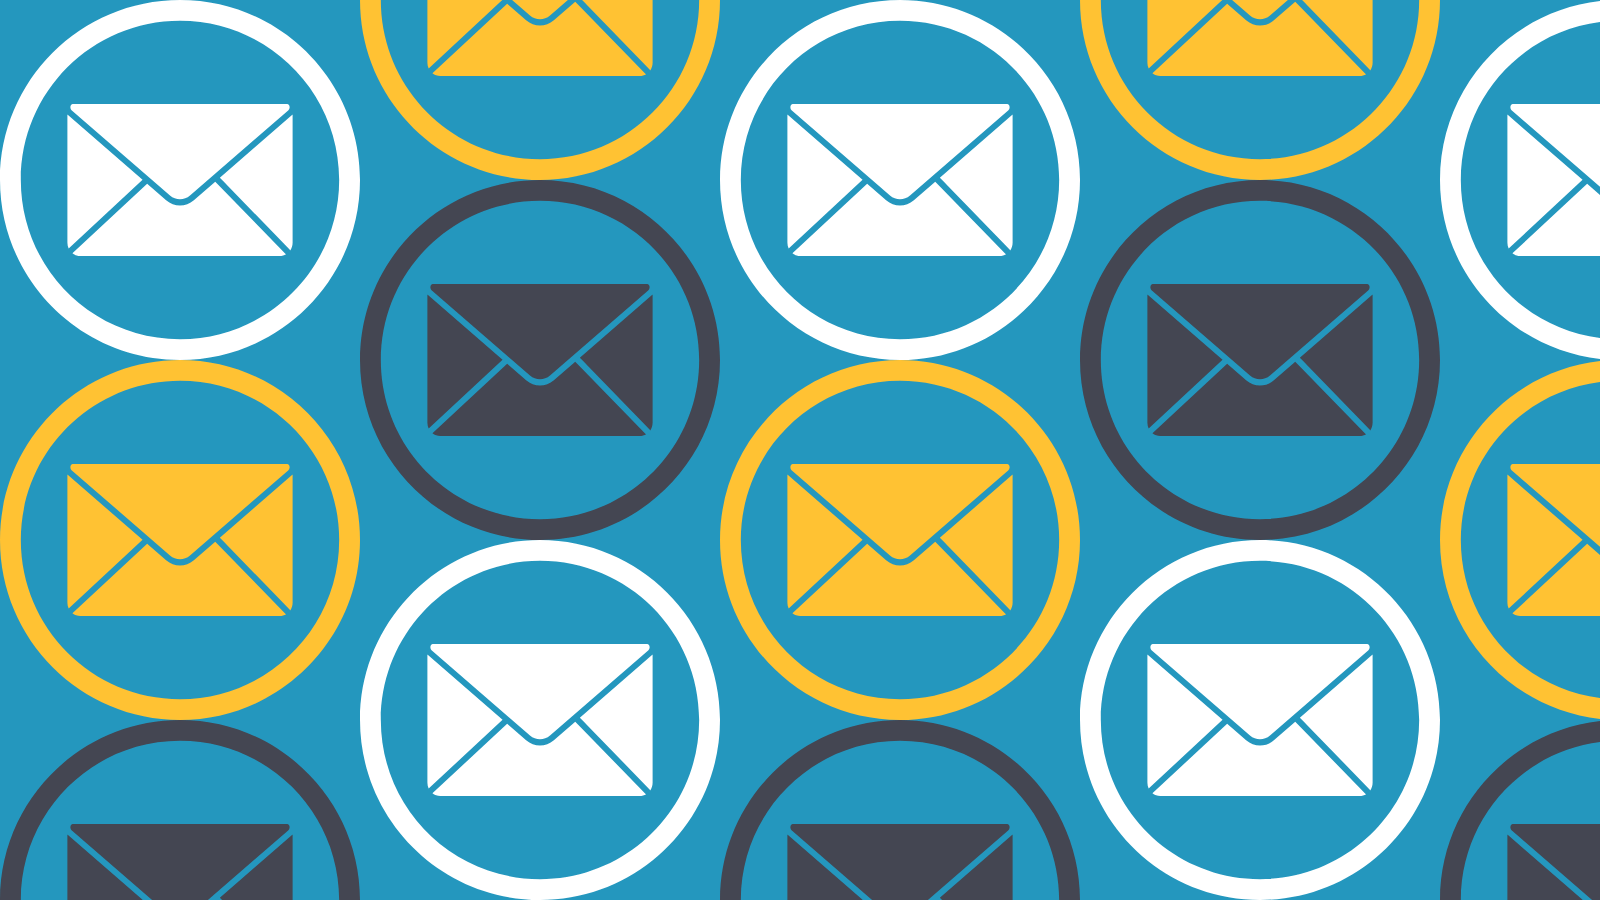 A repeating pattern of email icons